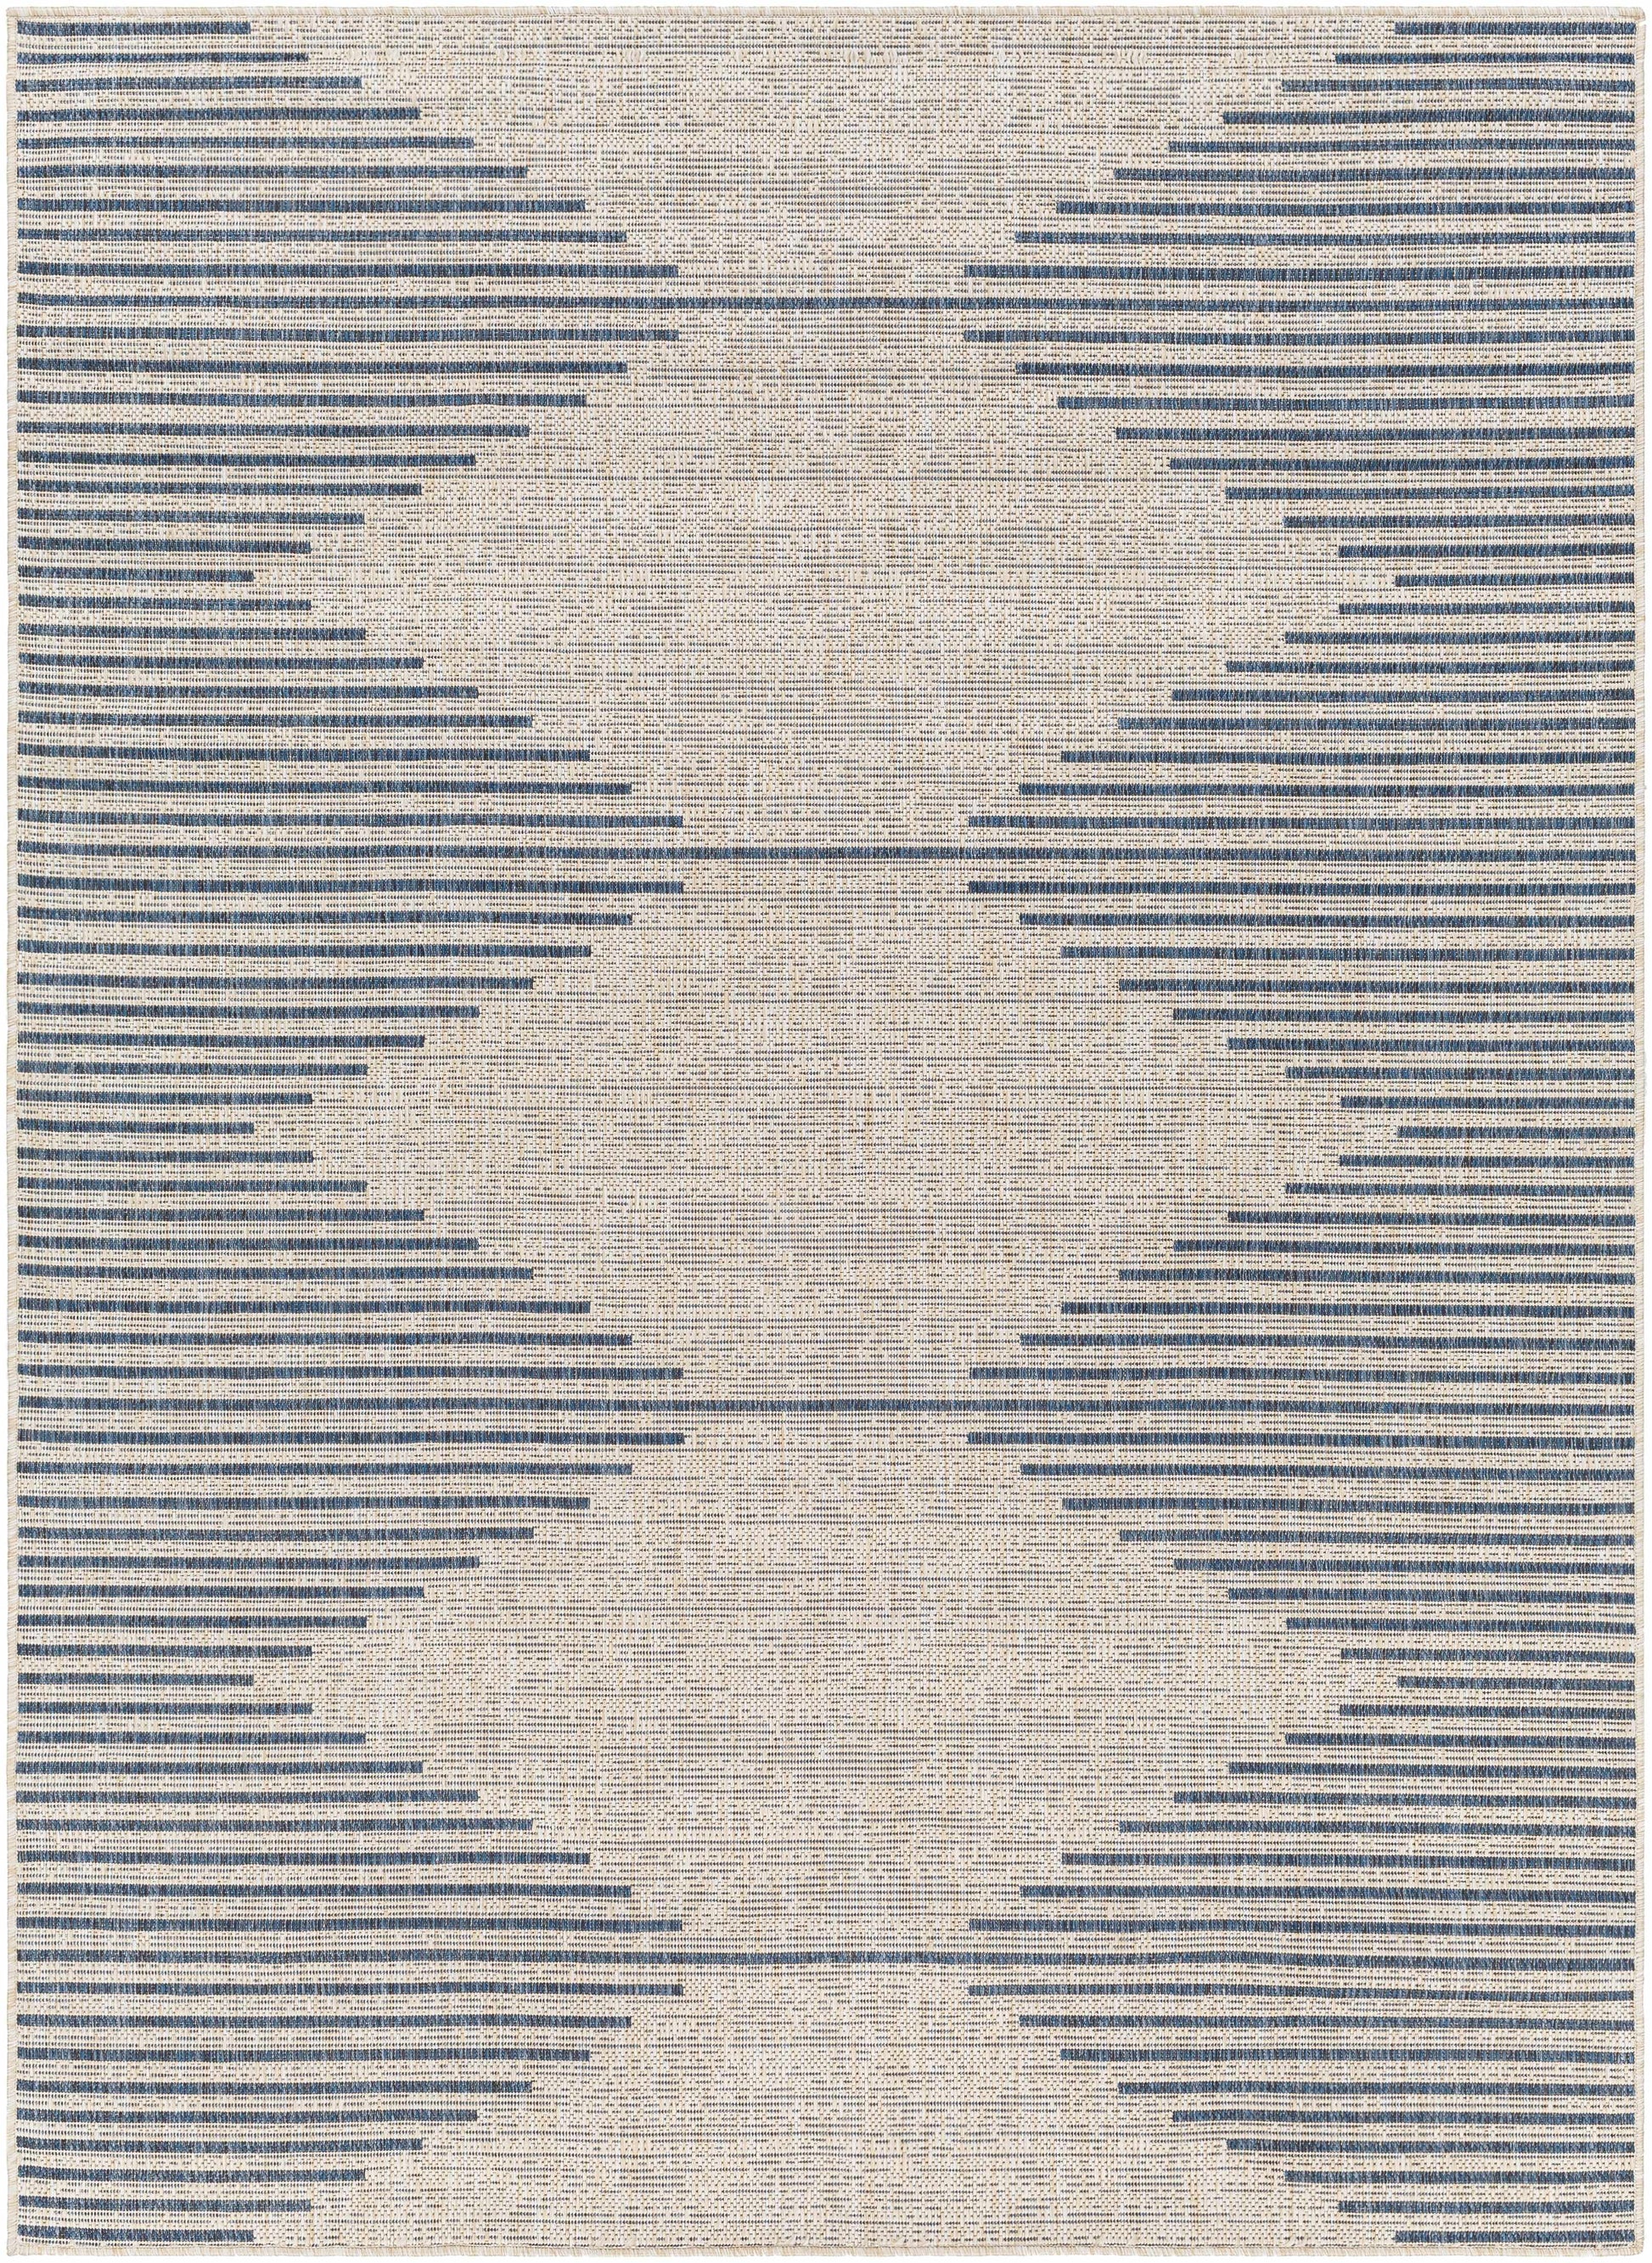 Boutique Rugs Rugs Wallkill Area Rug